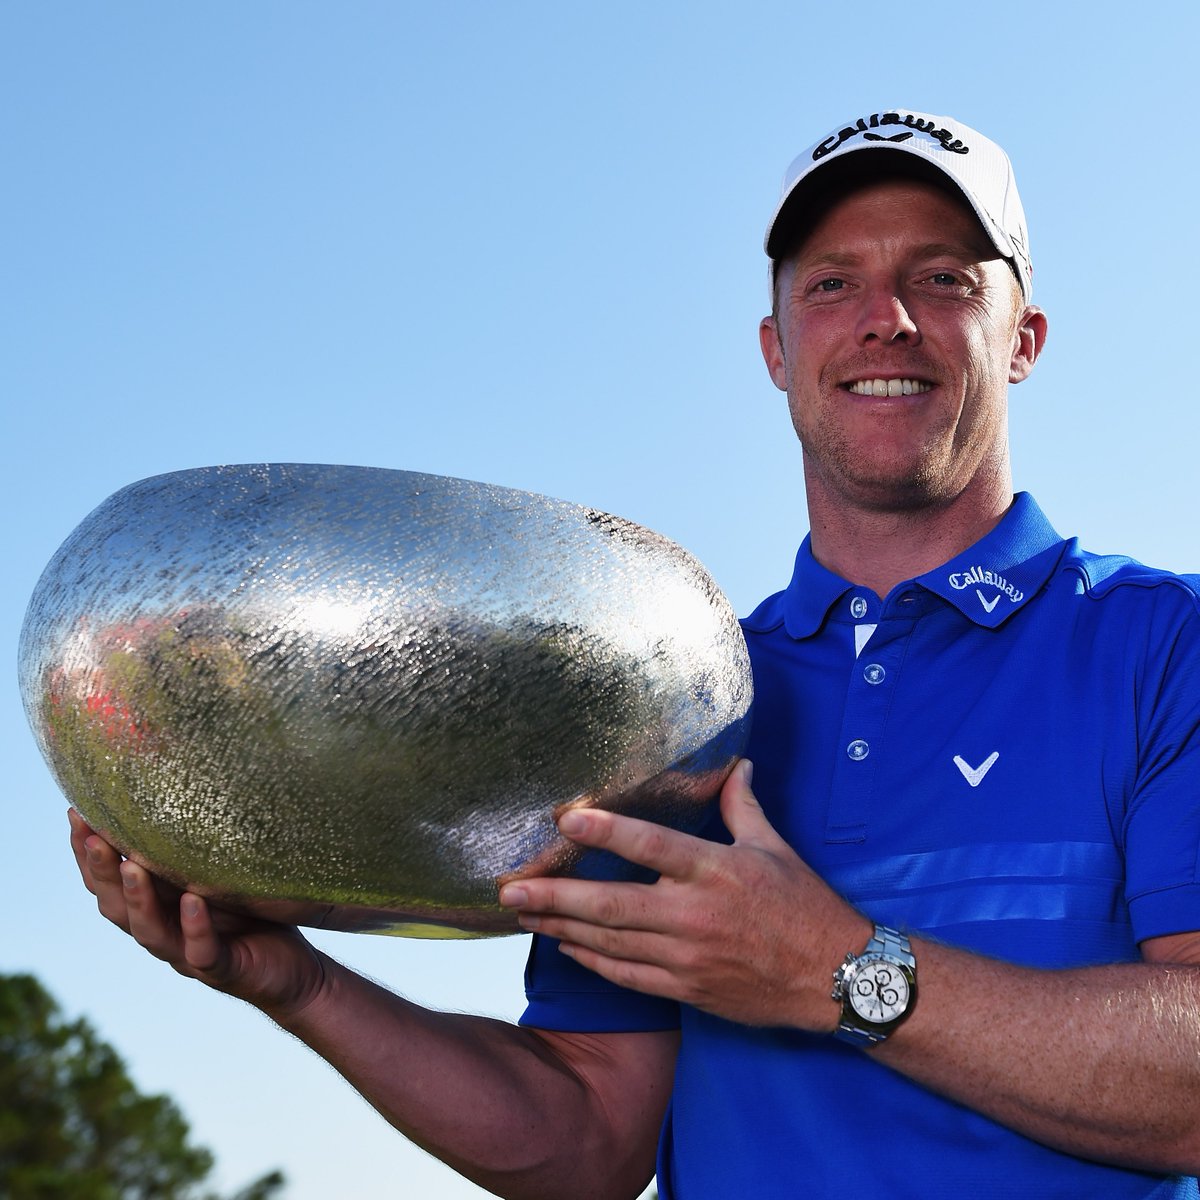 Both Marc Warren and David Horsey have won the Made in Denmark title on the DP World Tour 🏆 Will either of them rediscover that winning pedigree in Odense this week❓ #DanishGolfChallenge